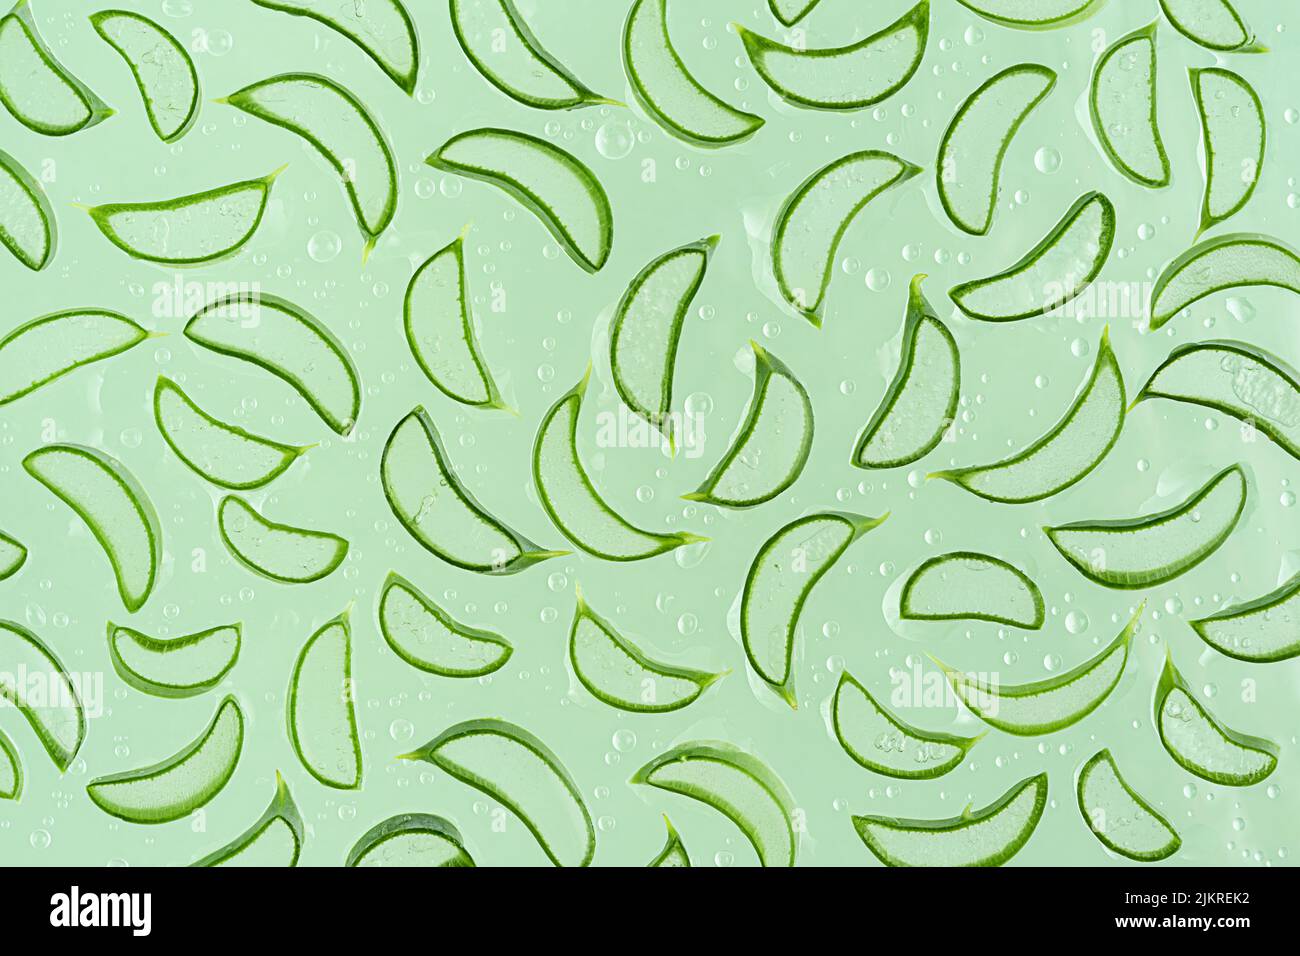 Pattern of aloe vera slices on green background. Top view Stock Photo